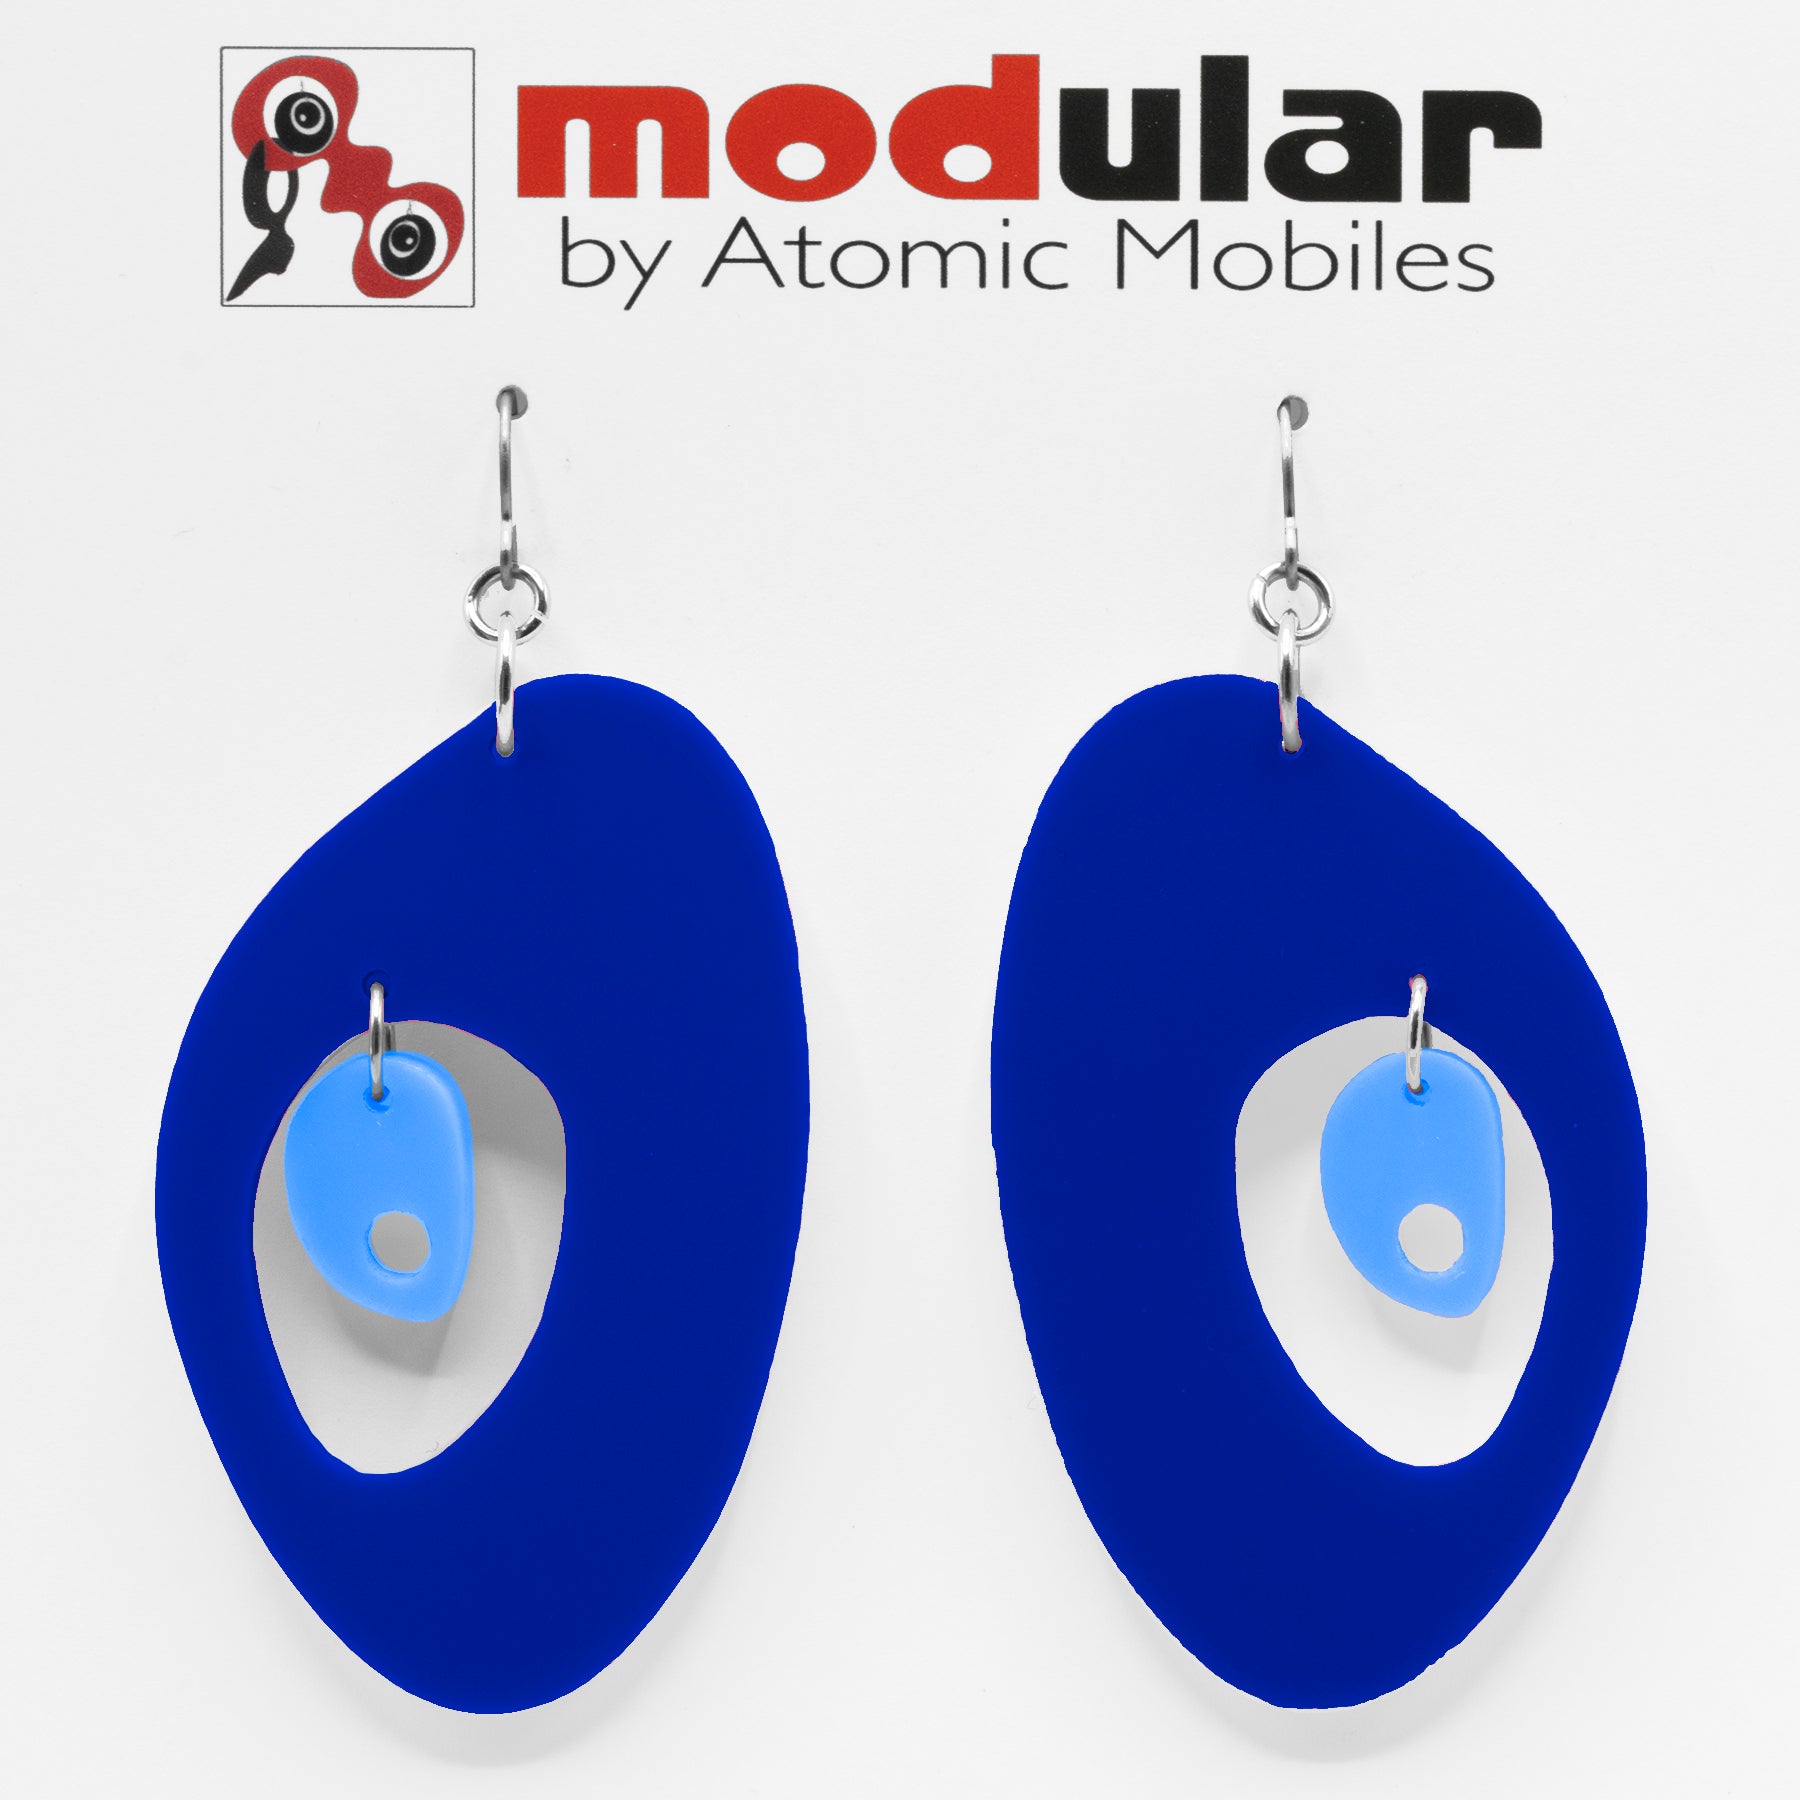 MODular Earrings - The Modernist Statement Earrings in Navy Blue by AtomicMobiles.com - retro era inspired mod handmade jewelry